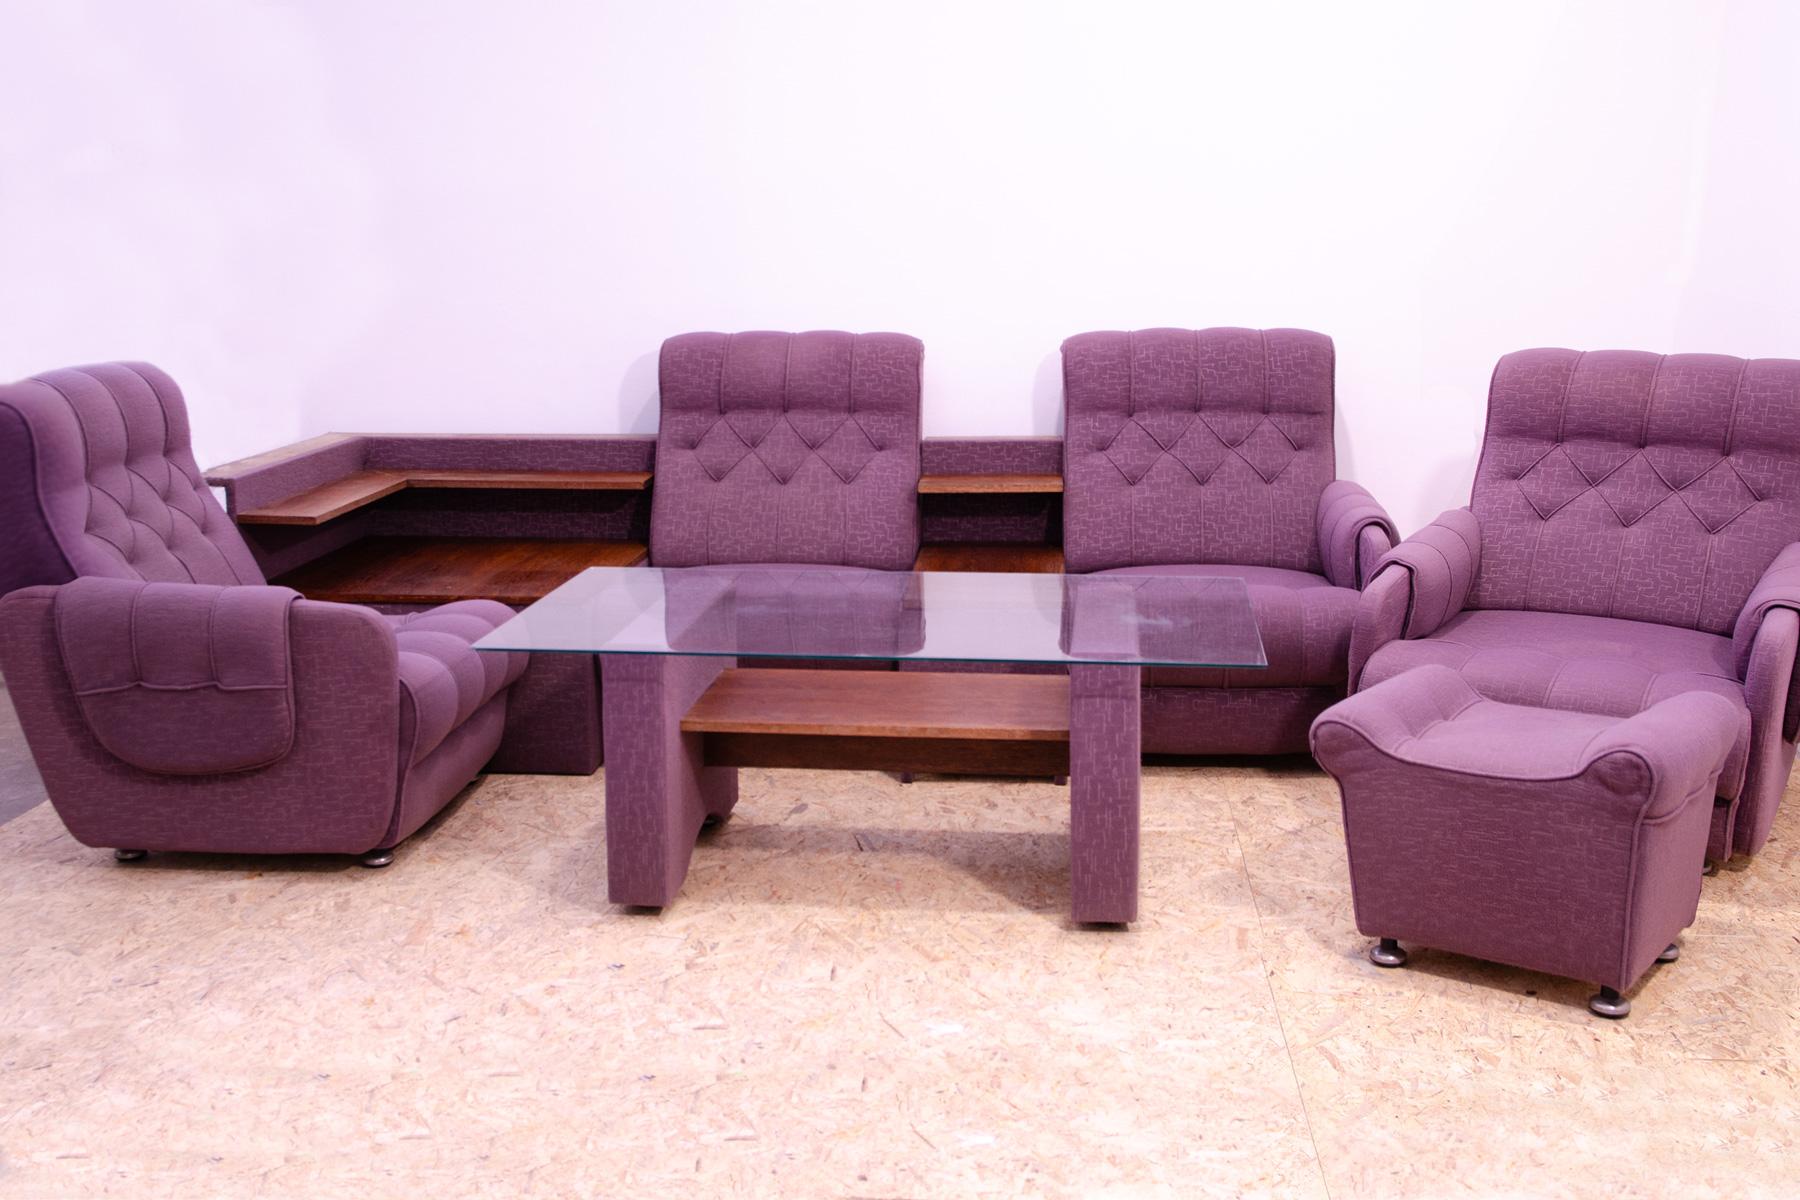 This vintage living room set is a typical example of furniture design of the 1970/1980´s in the former Czechoslovakia.

The furniture is very comfortable.
It consists of four armchairs conected together with a wooden side which serves as a side